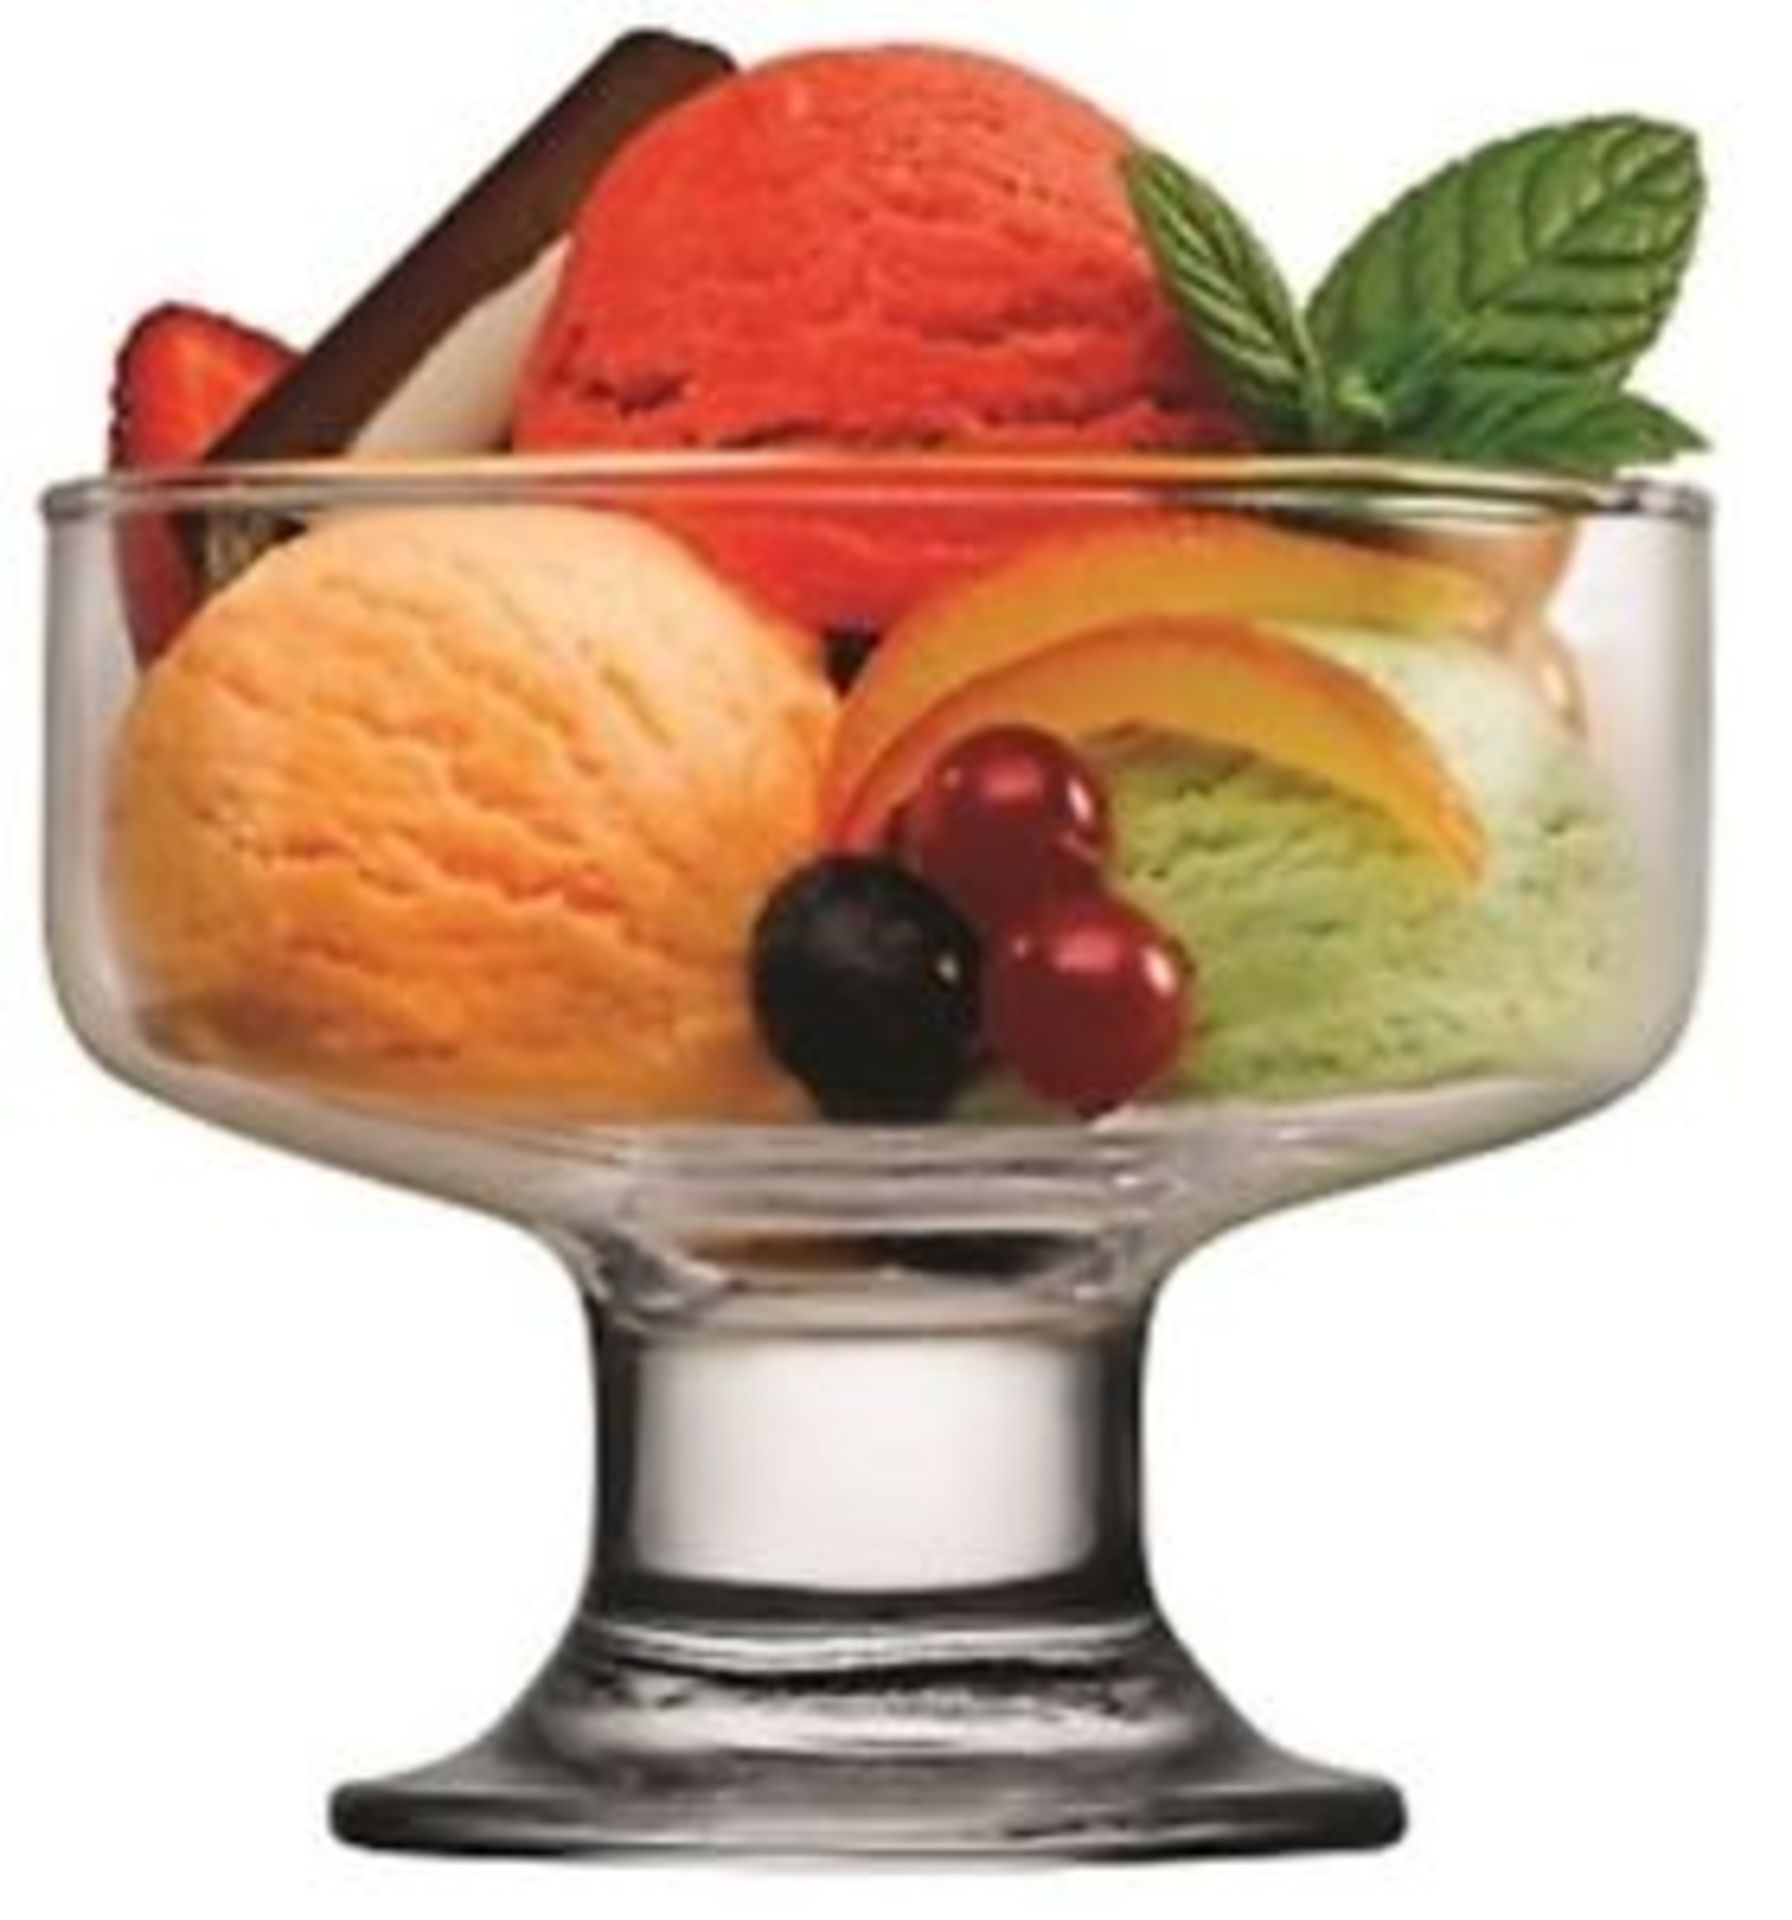 30 x Pasabahce 'Iceville' Commercial Quality Glass Ice Cream / Dessert Bowls - New/Boxed Stock -